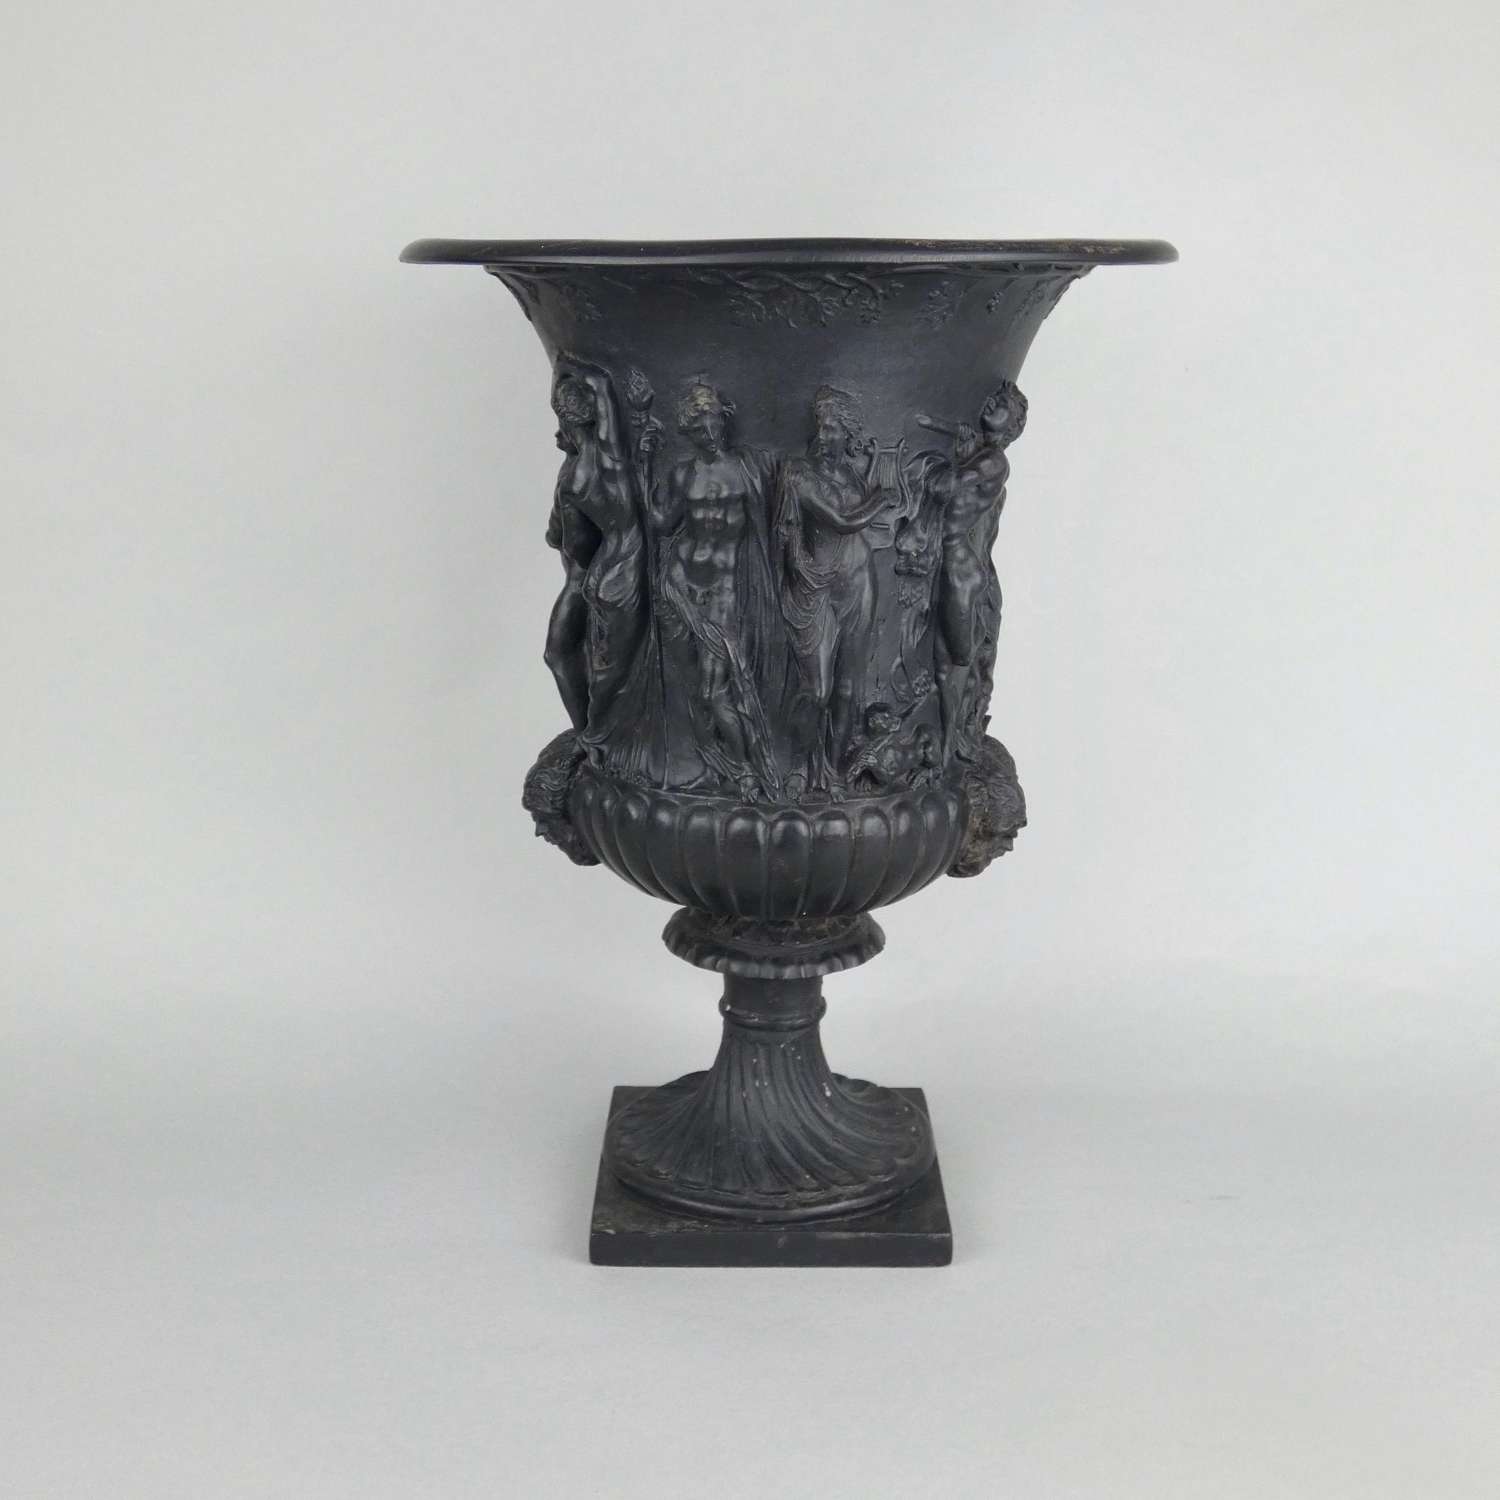 18th century, plaster copy of the Borghese Vase